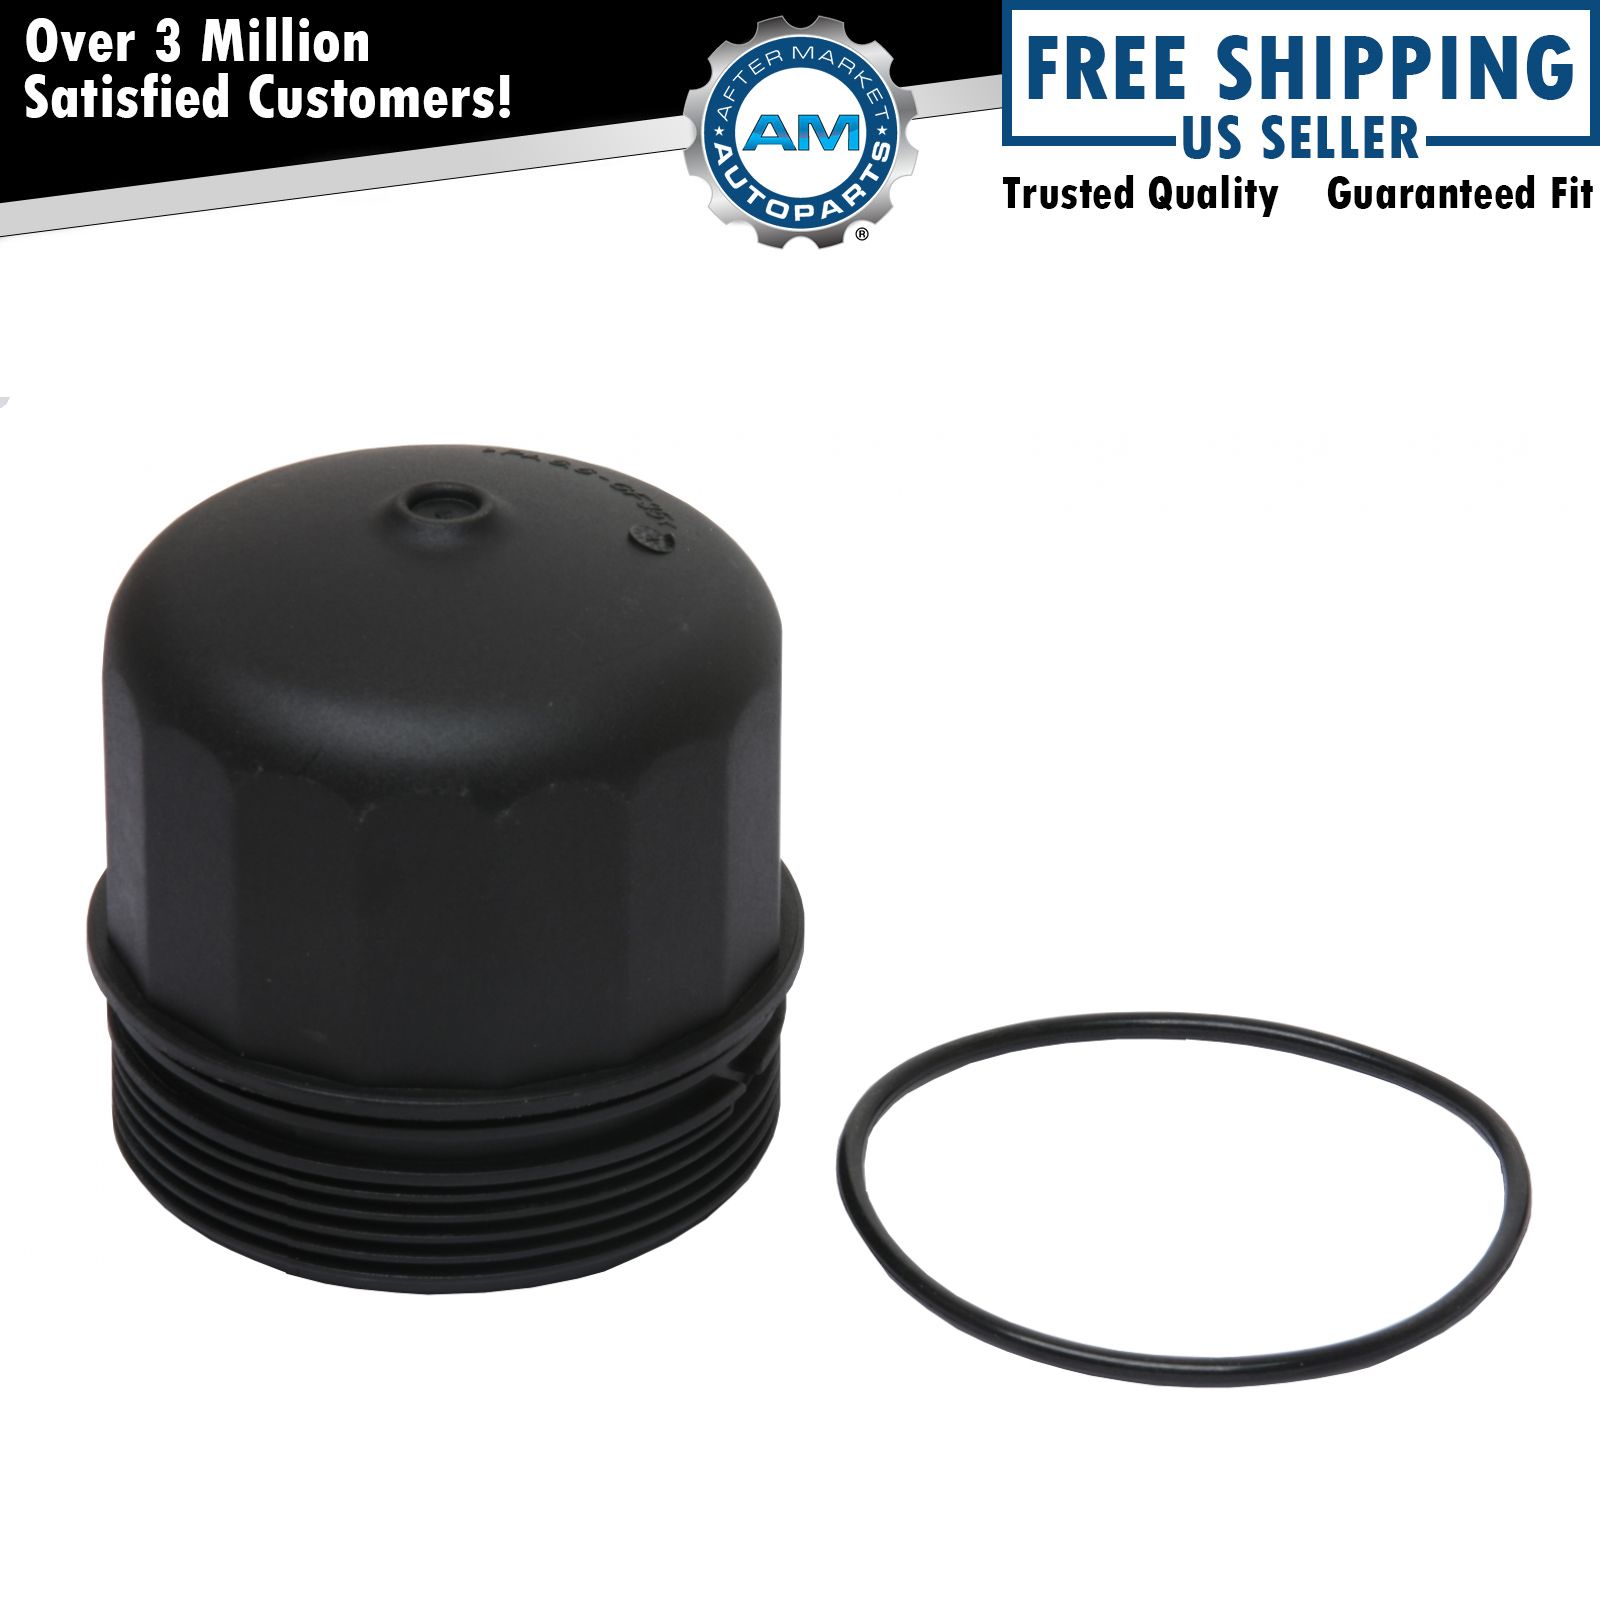 Engine Oil Filter Cover & O-Ring for Volvo 40 60 70 80 90 NEW